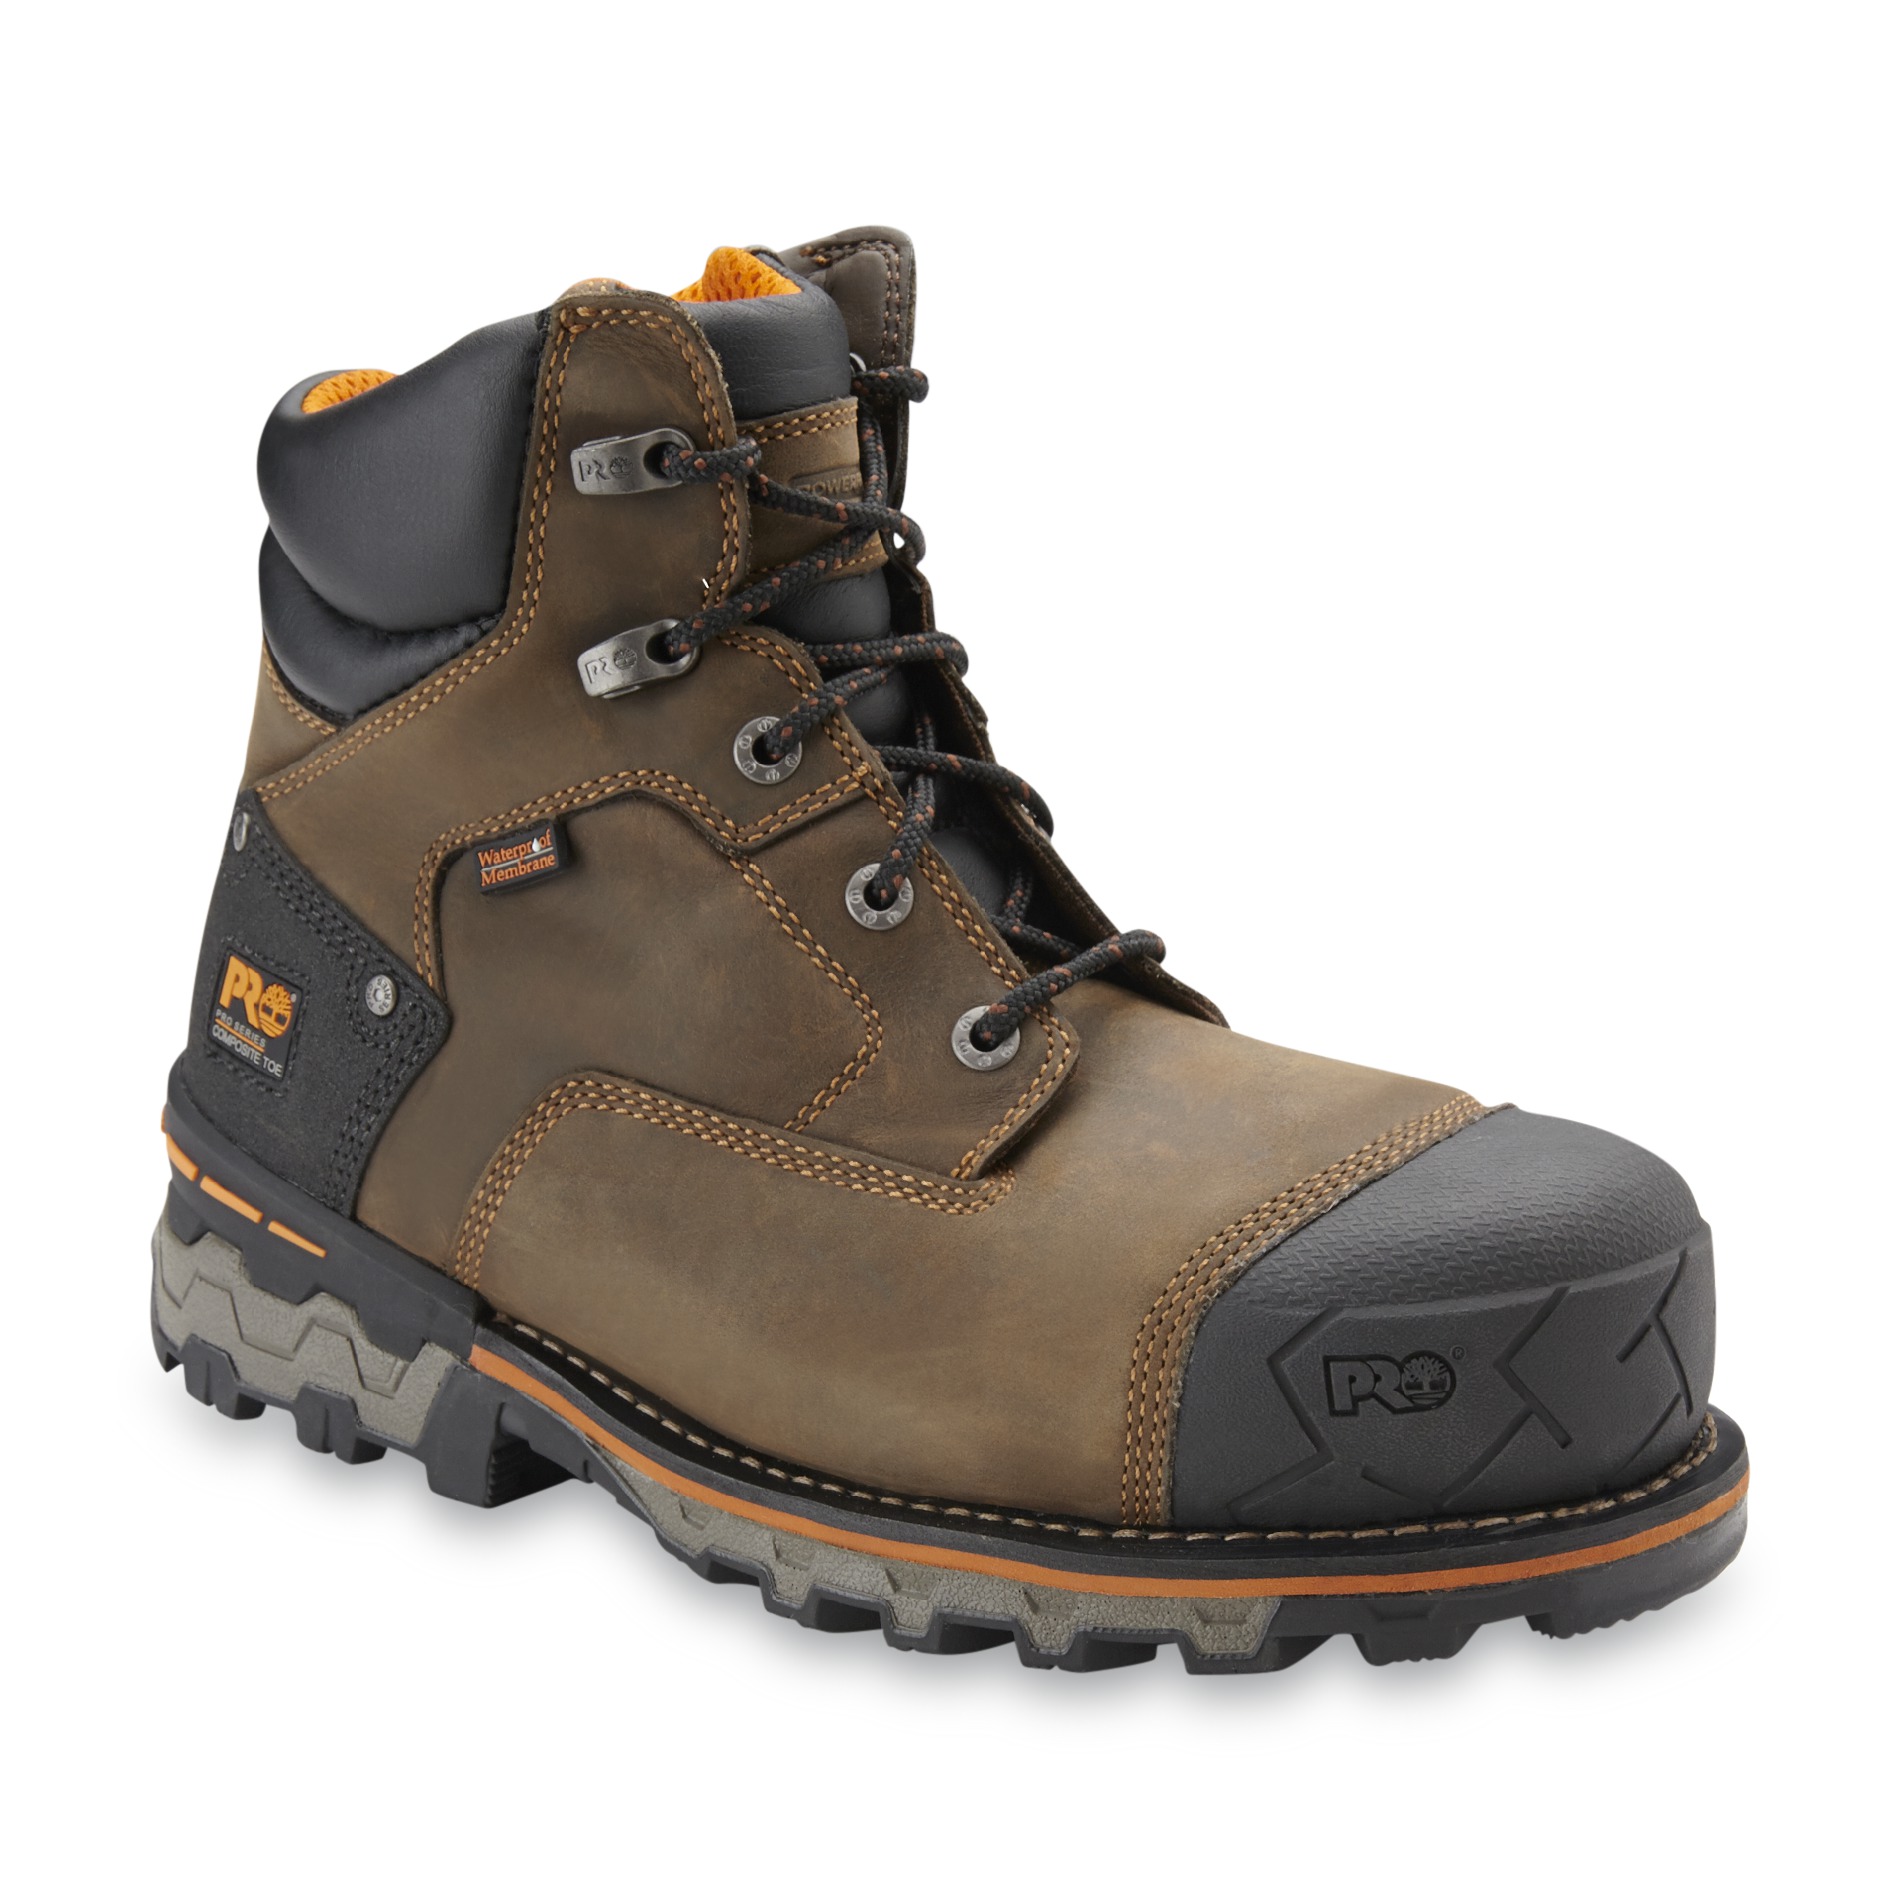 Timberland PRO Men's Work Shoes \u0026 Boots 